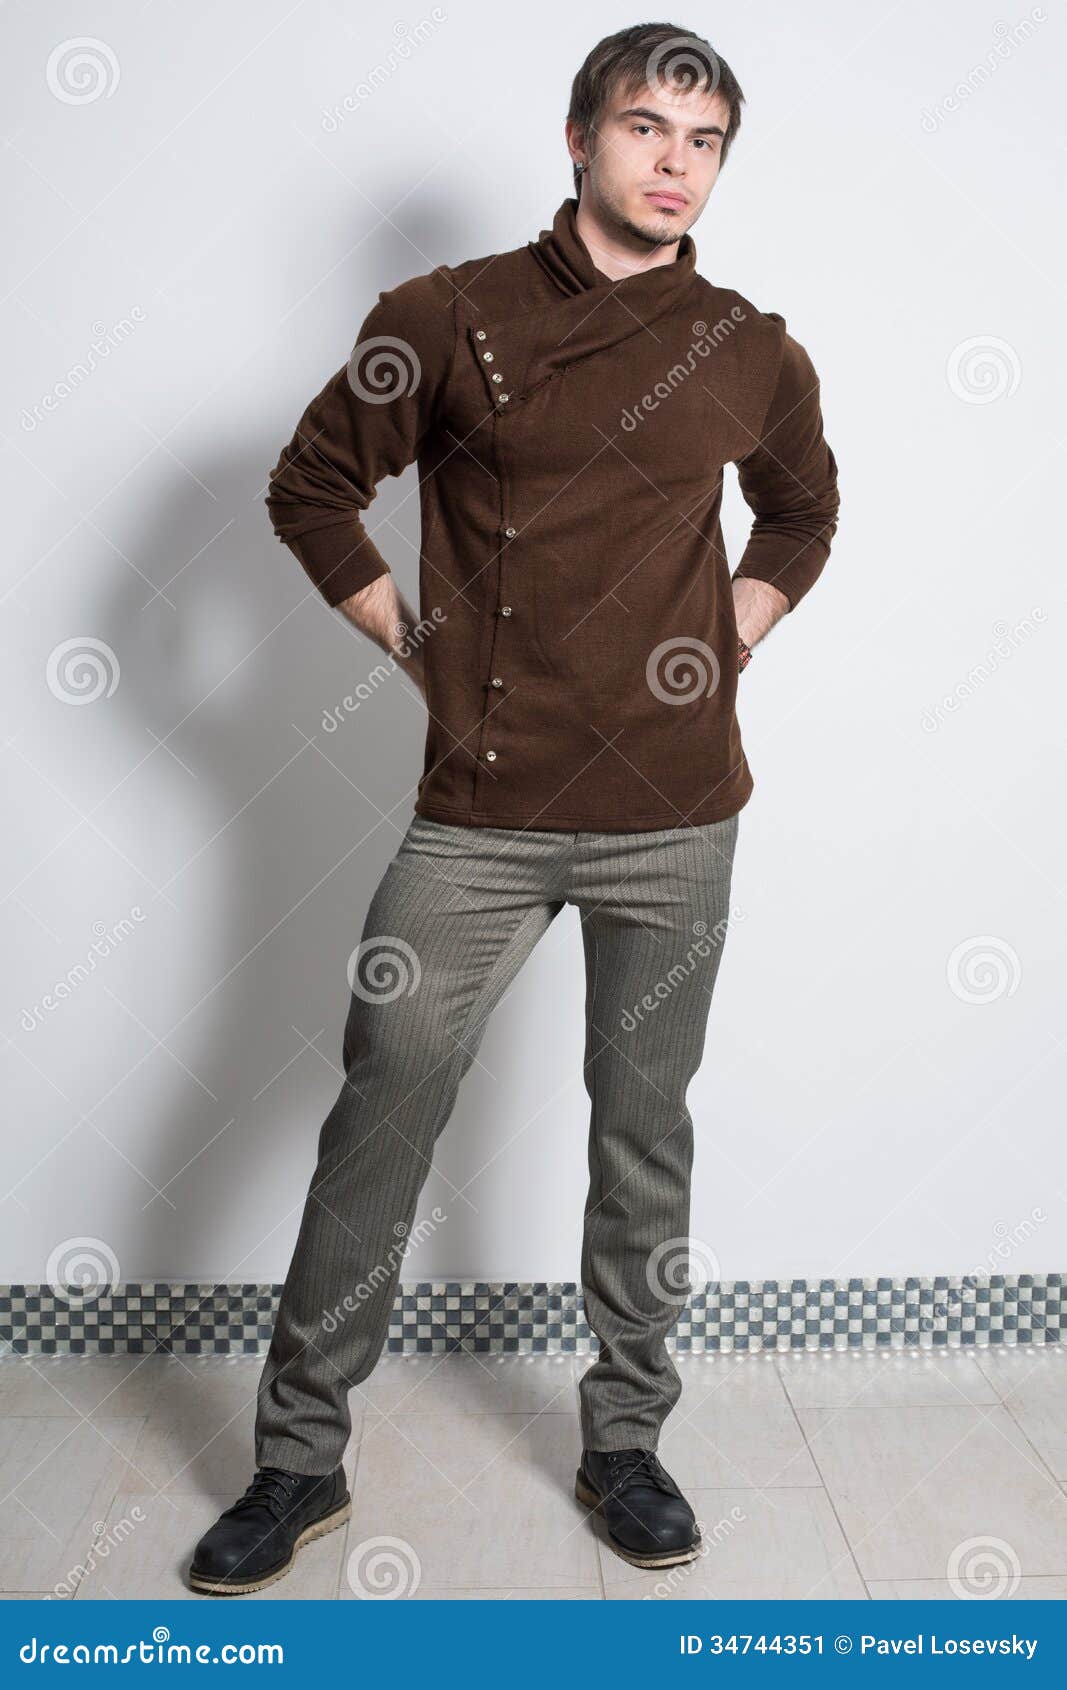 The Man In Gray Trousers And Fashionable Brown Sweater 